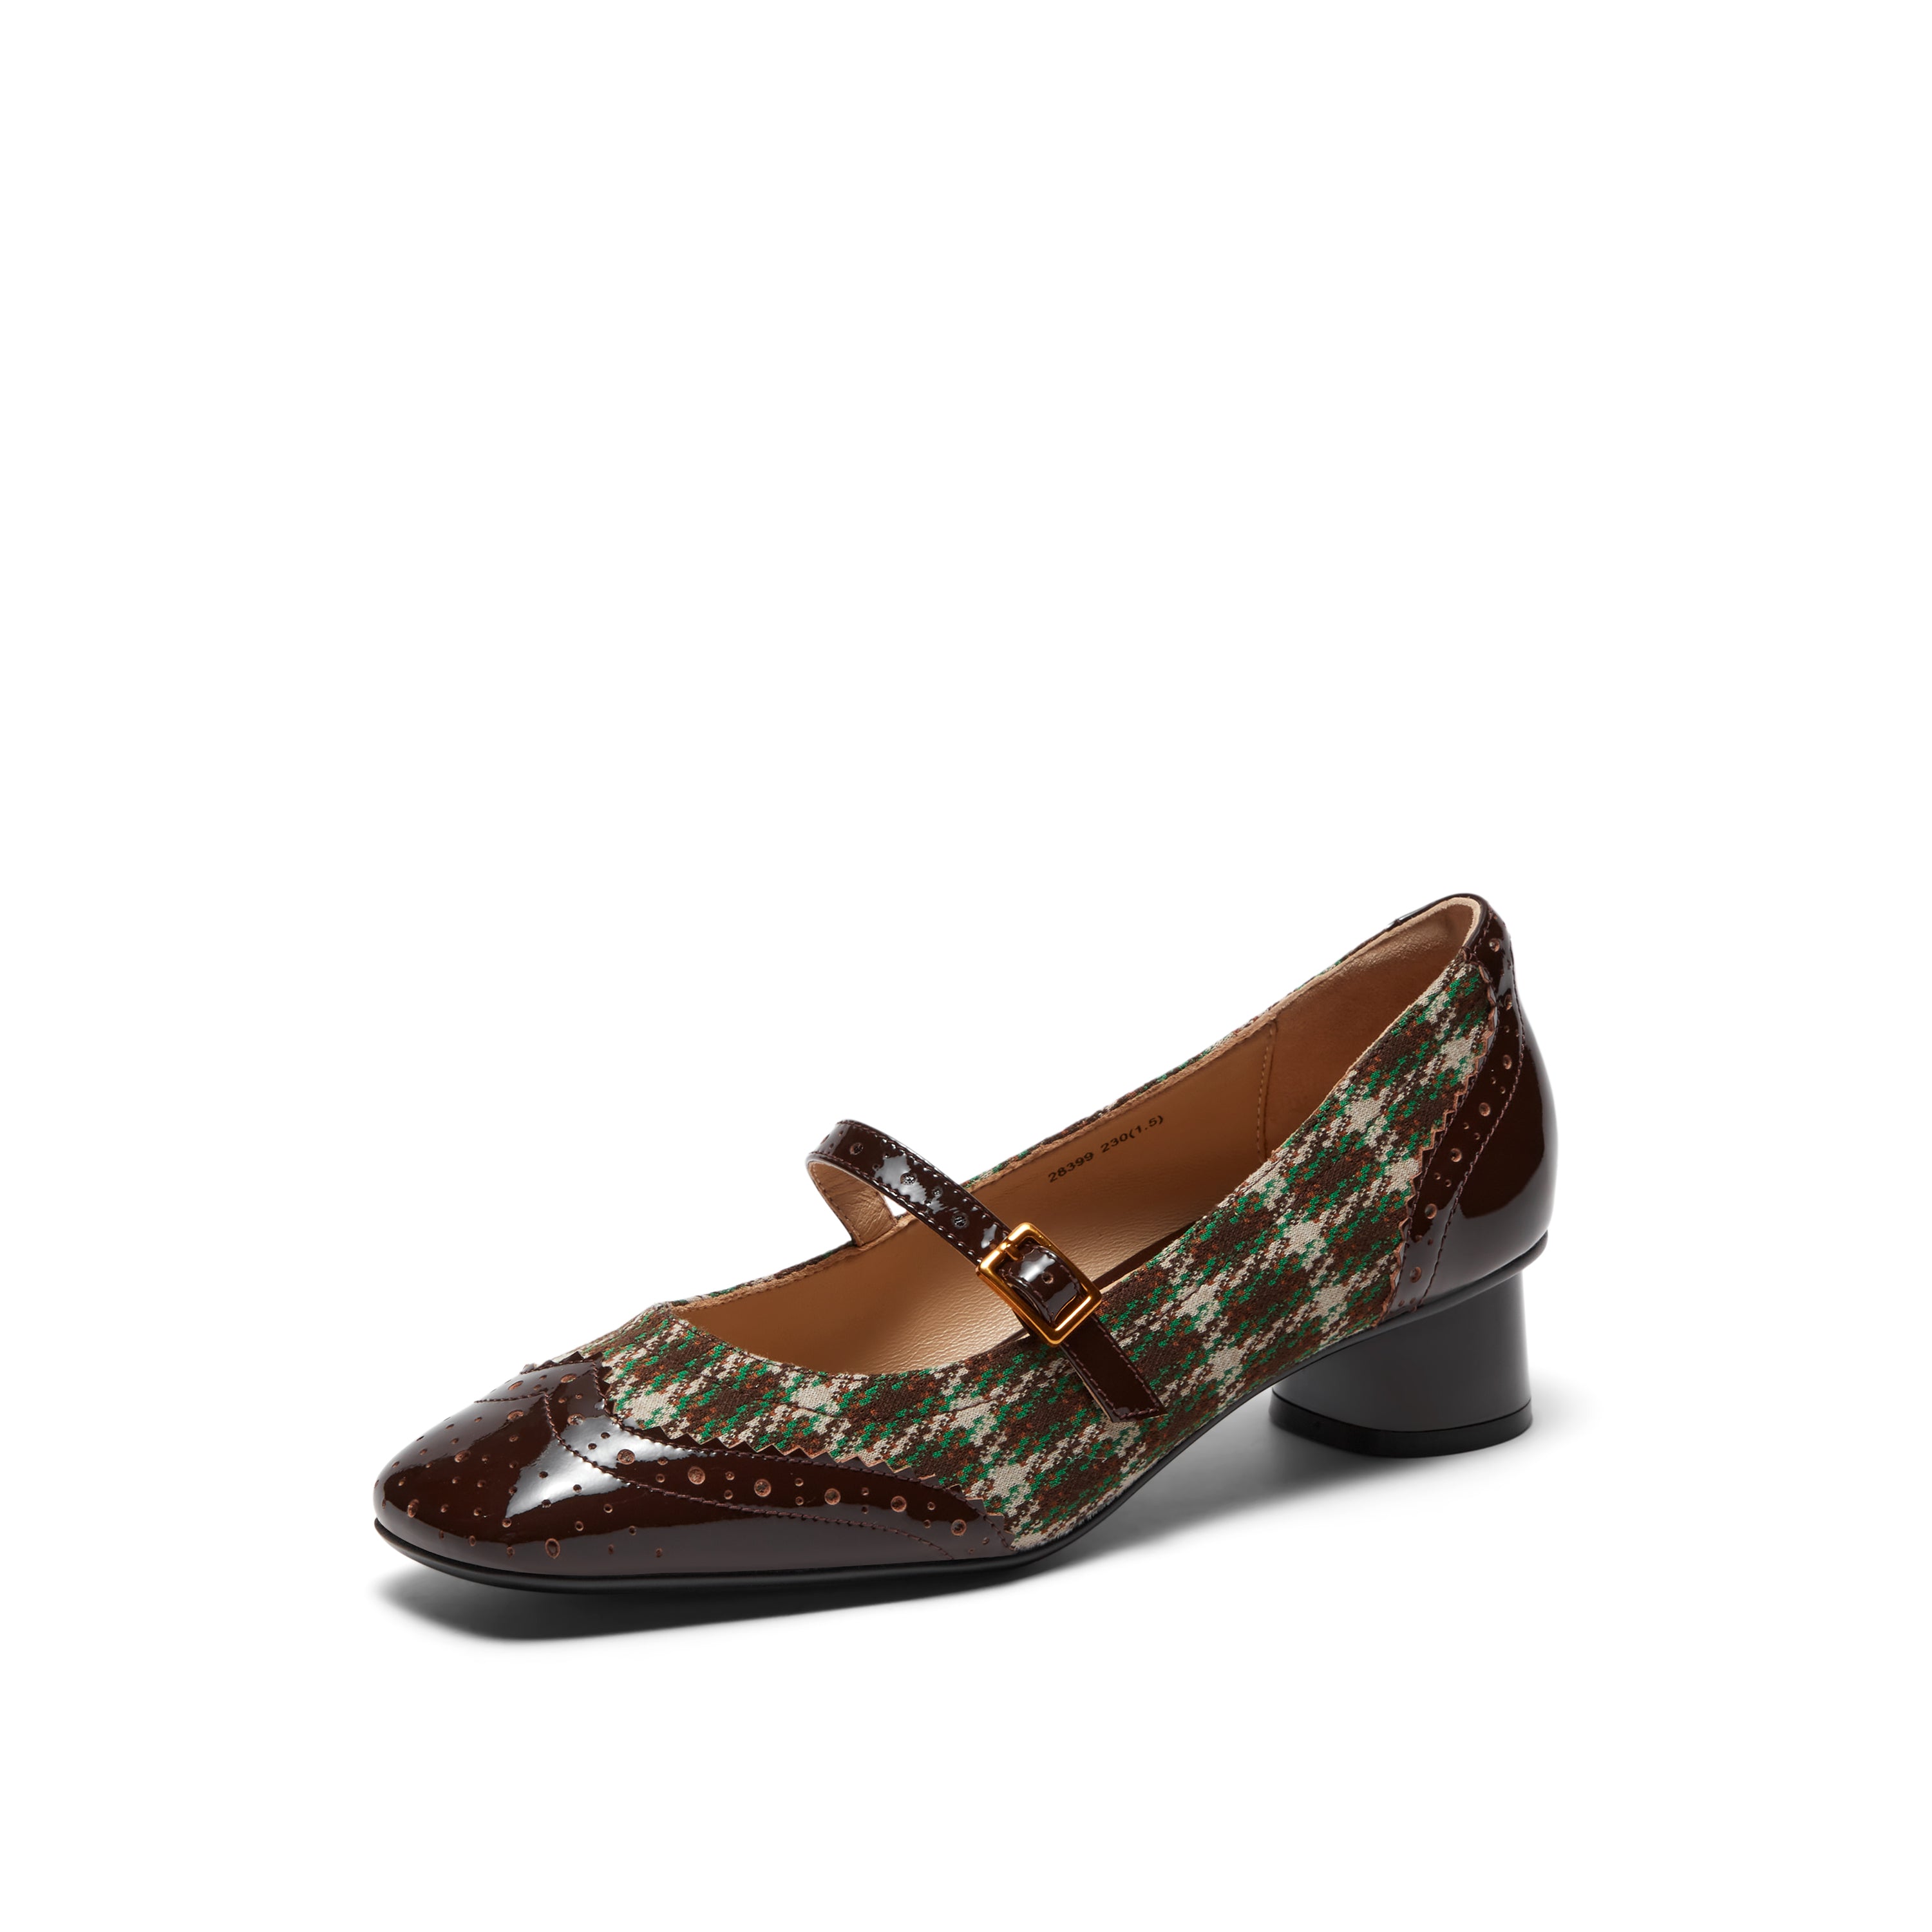 Check Patterned Mary Jane with Square Toe